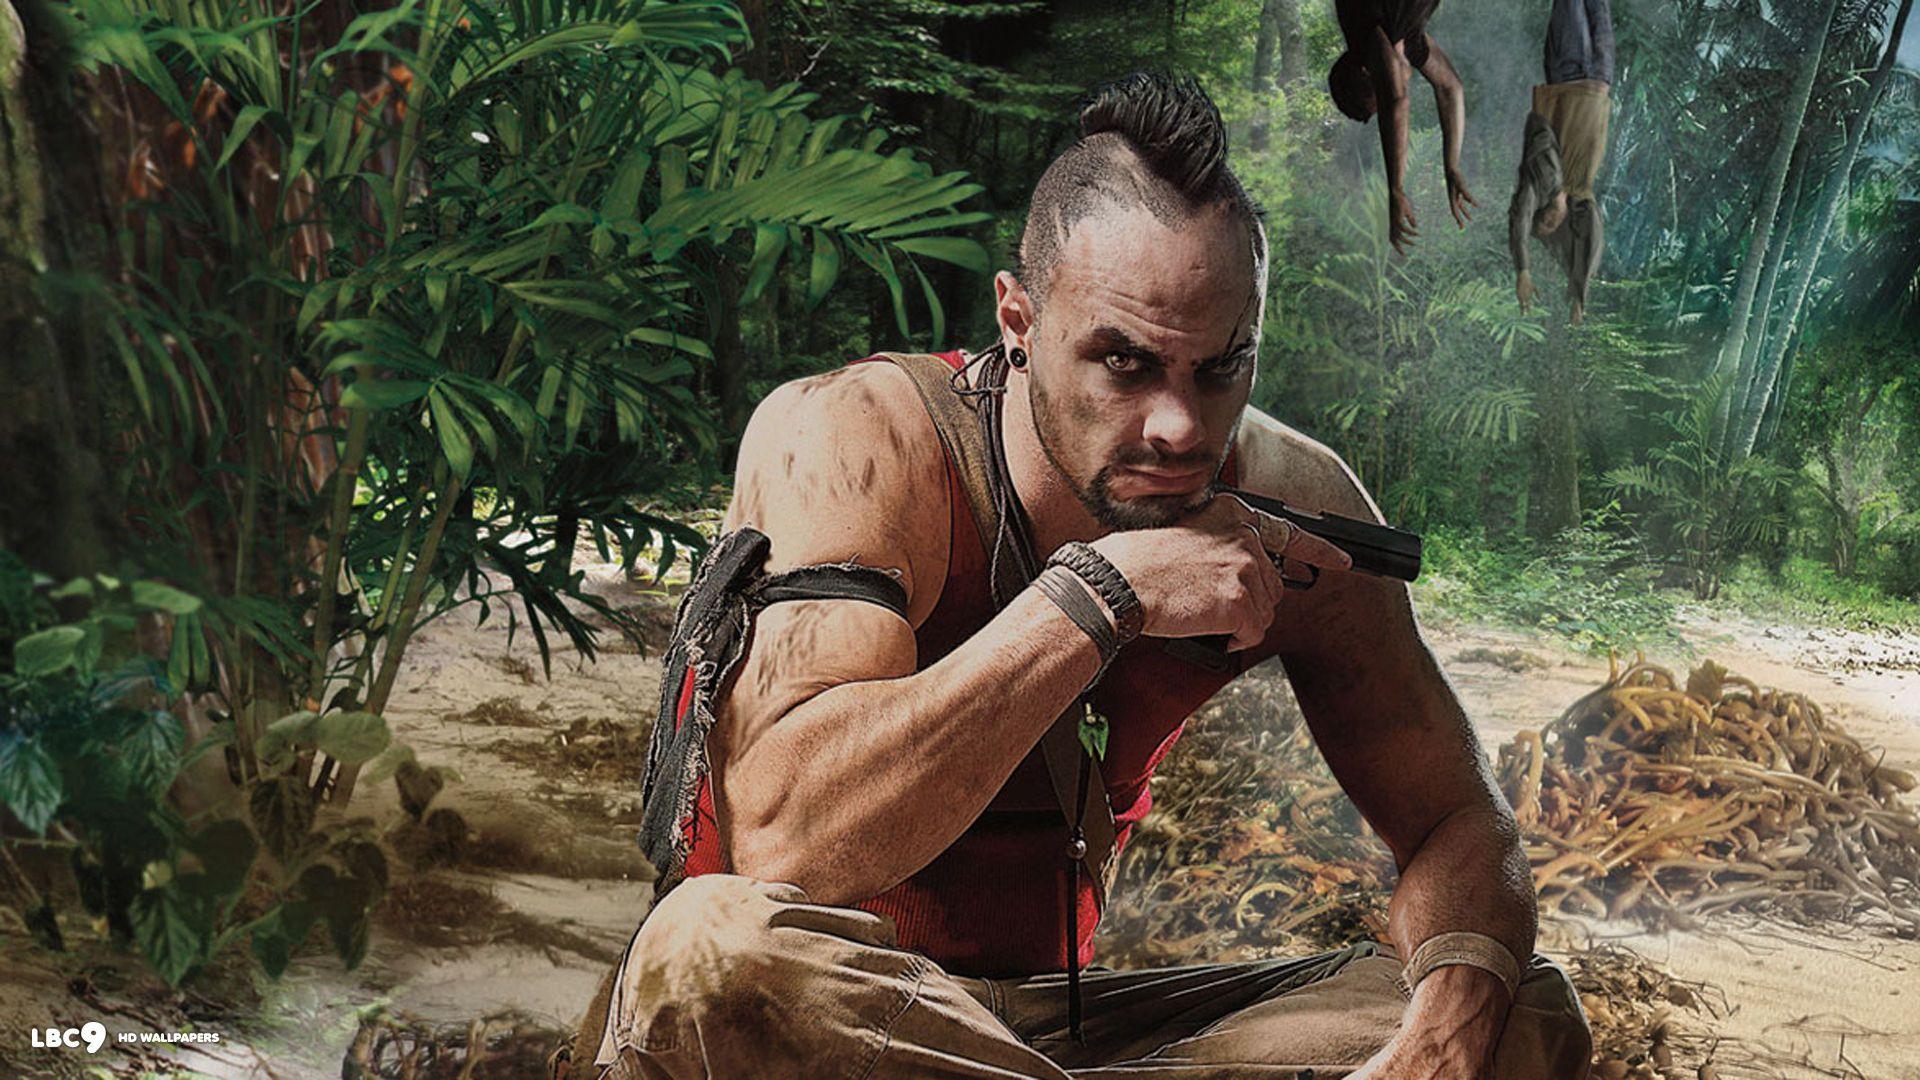 Download Vaas from Far Cry 3 - Alluring and Fearless Wallpaper | Wallpapers .com